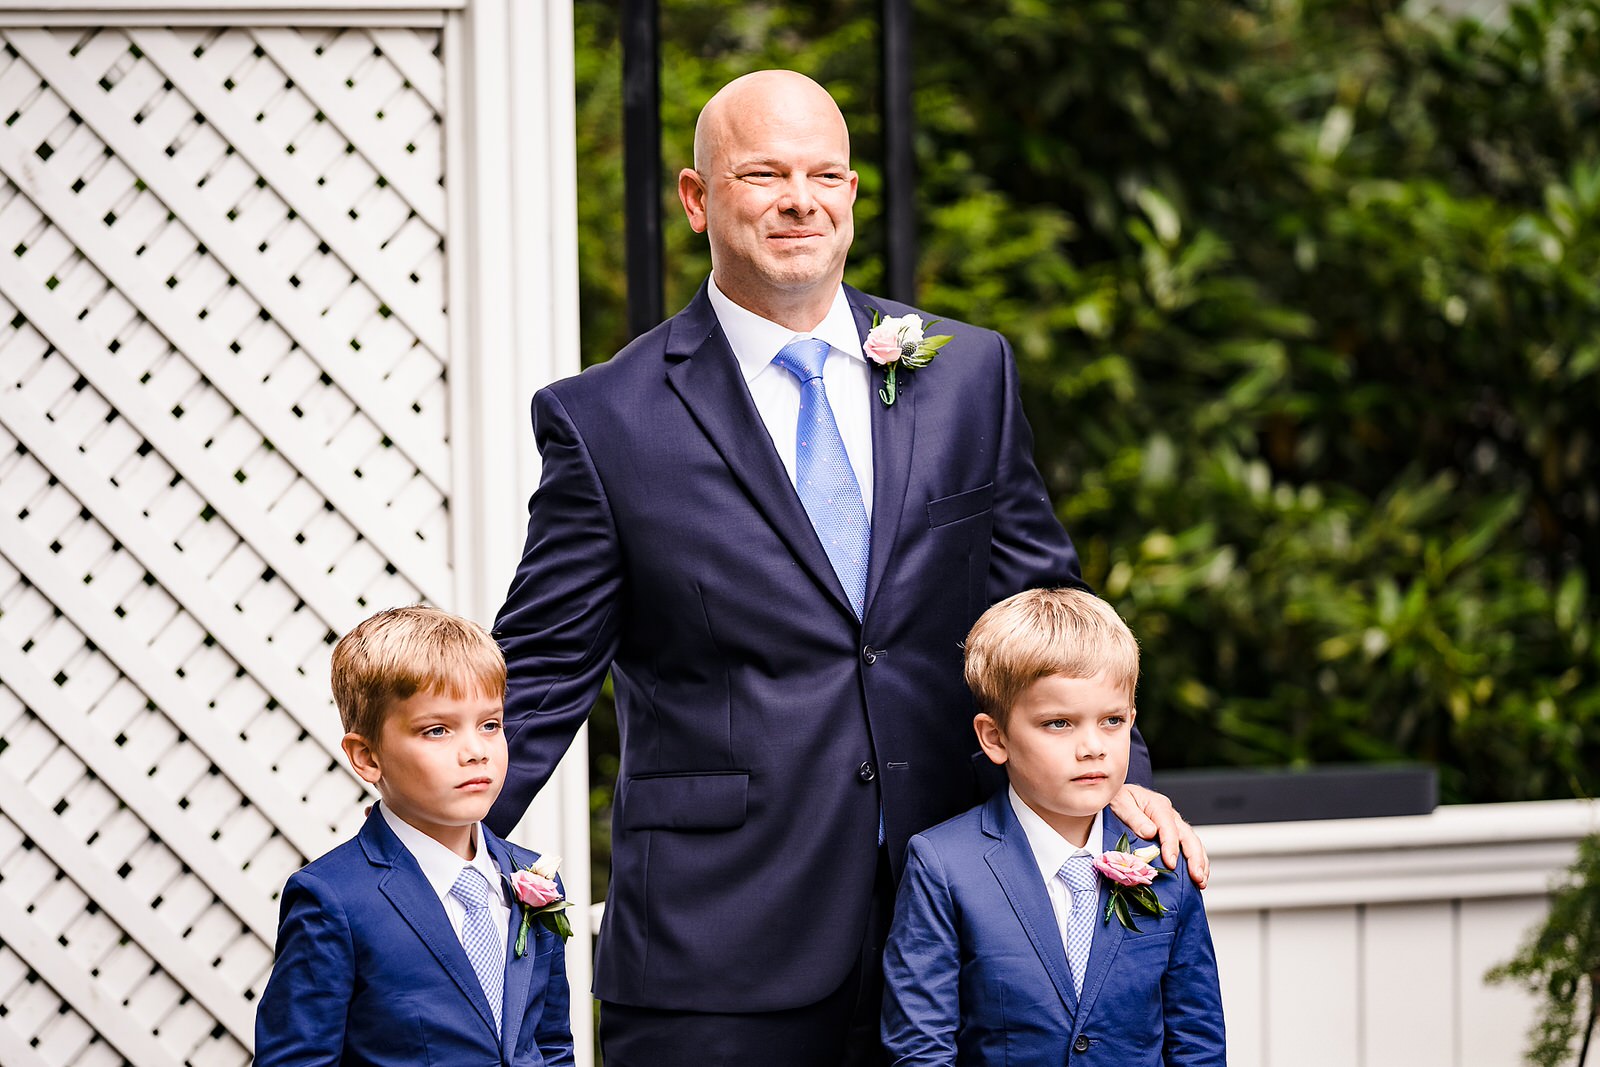 Groom stands with his sons at front of ceremony waiting for bride to walk down the aisle